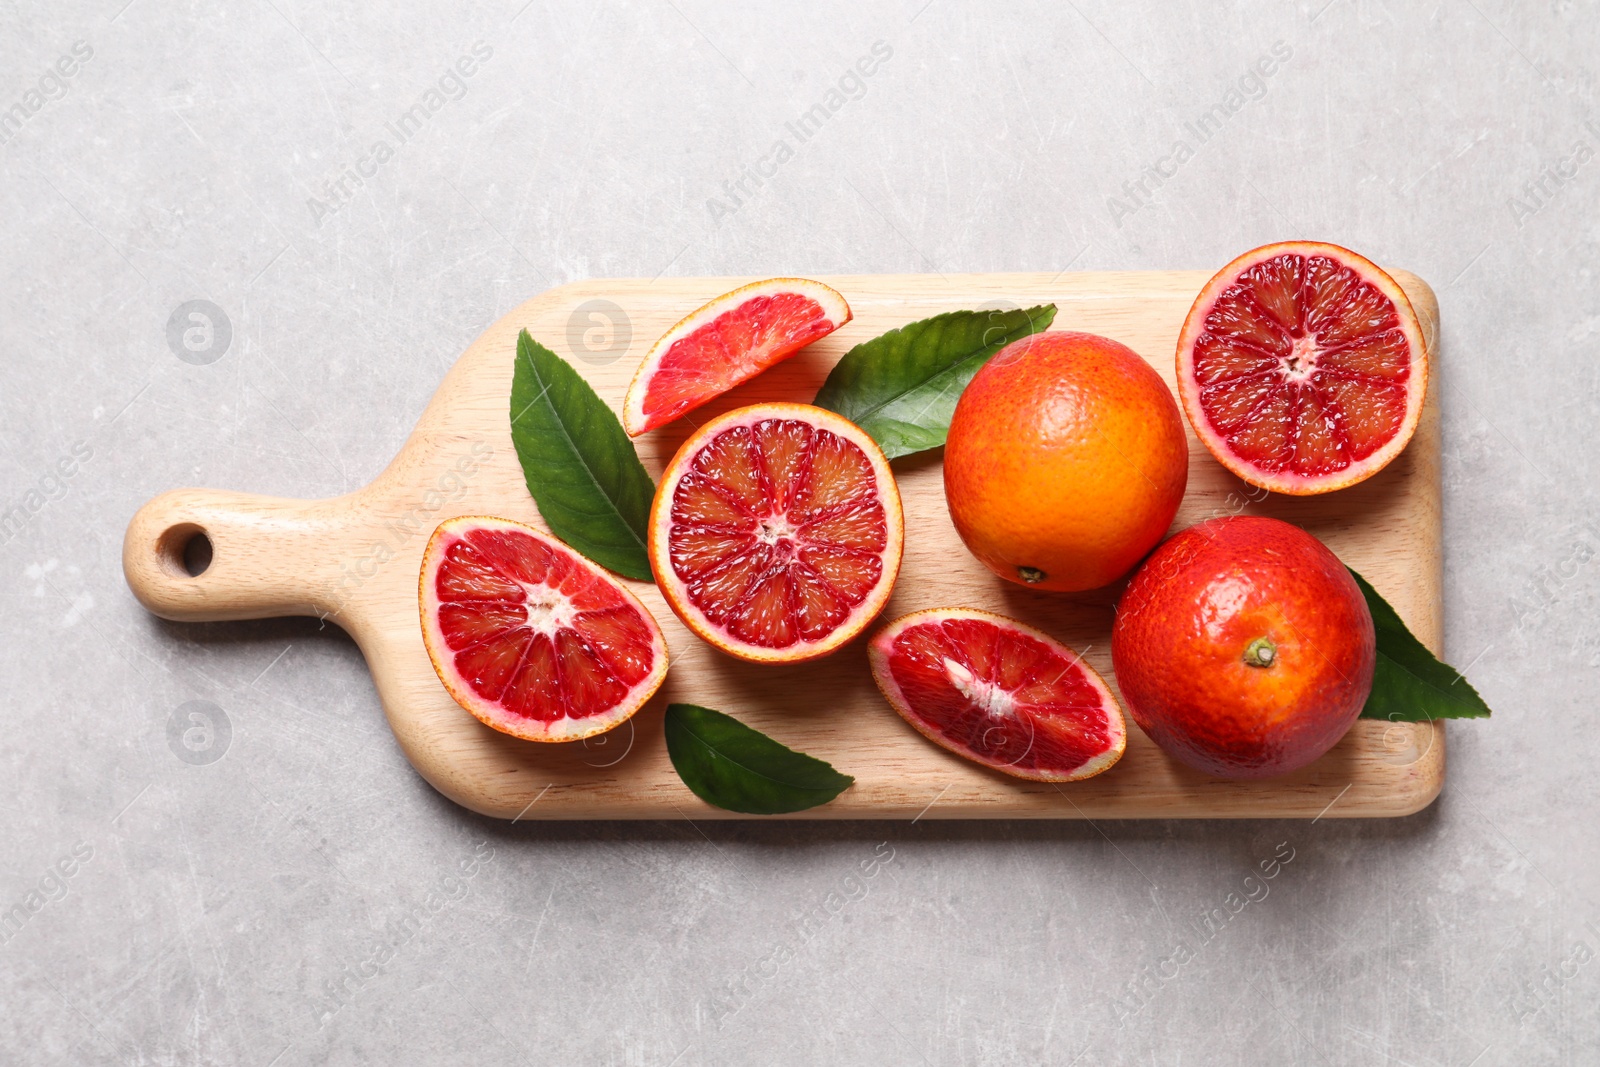 Photo of Ripe red oranges, green leaves and wooden board on light table, top view